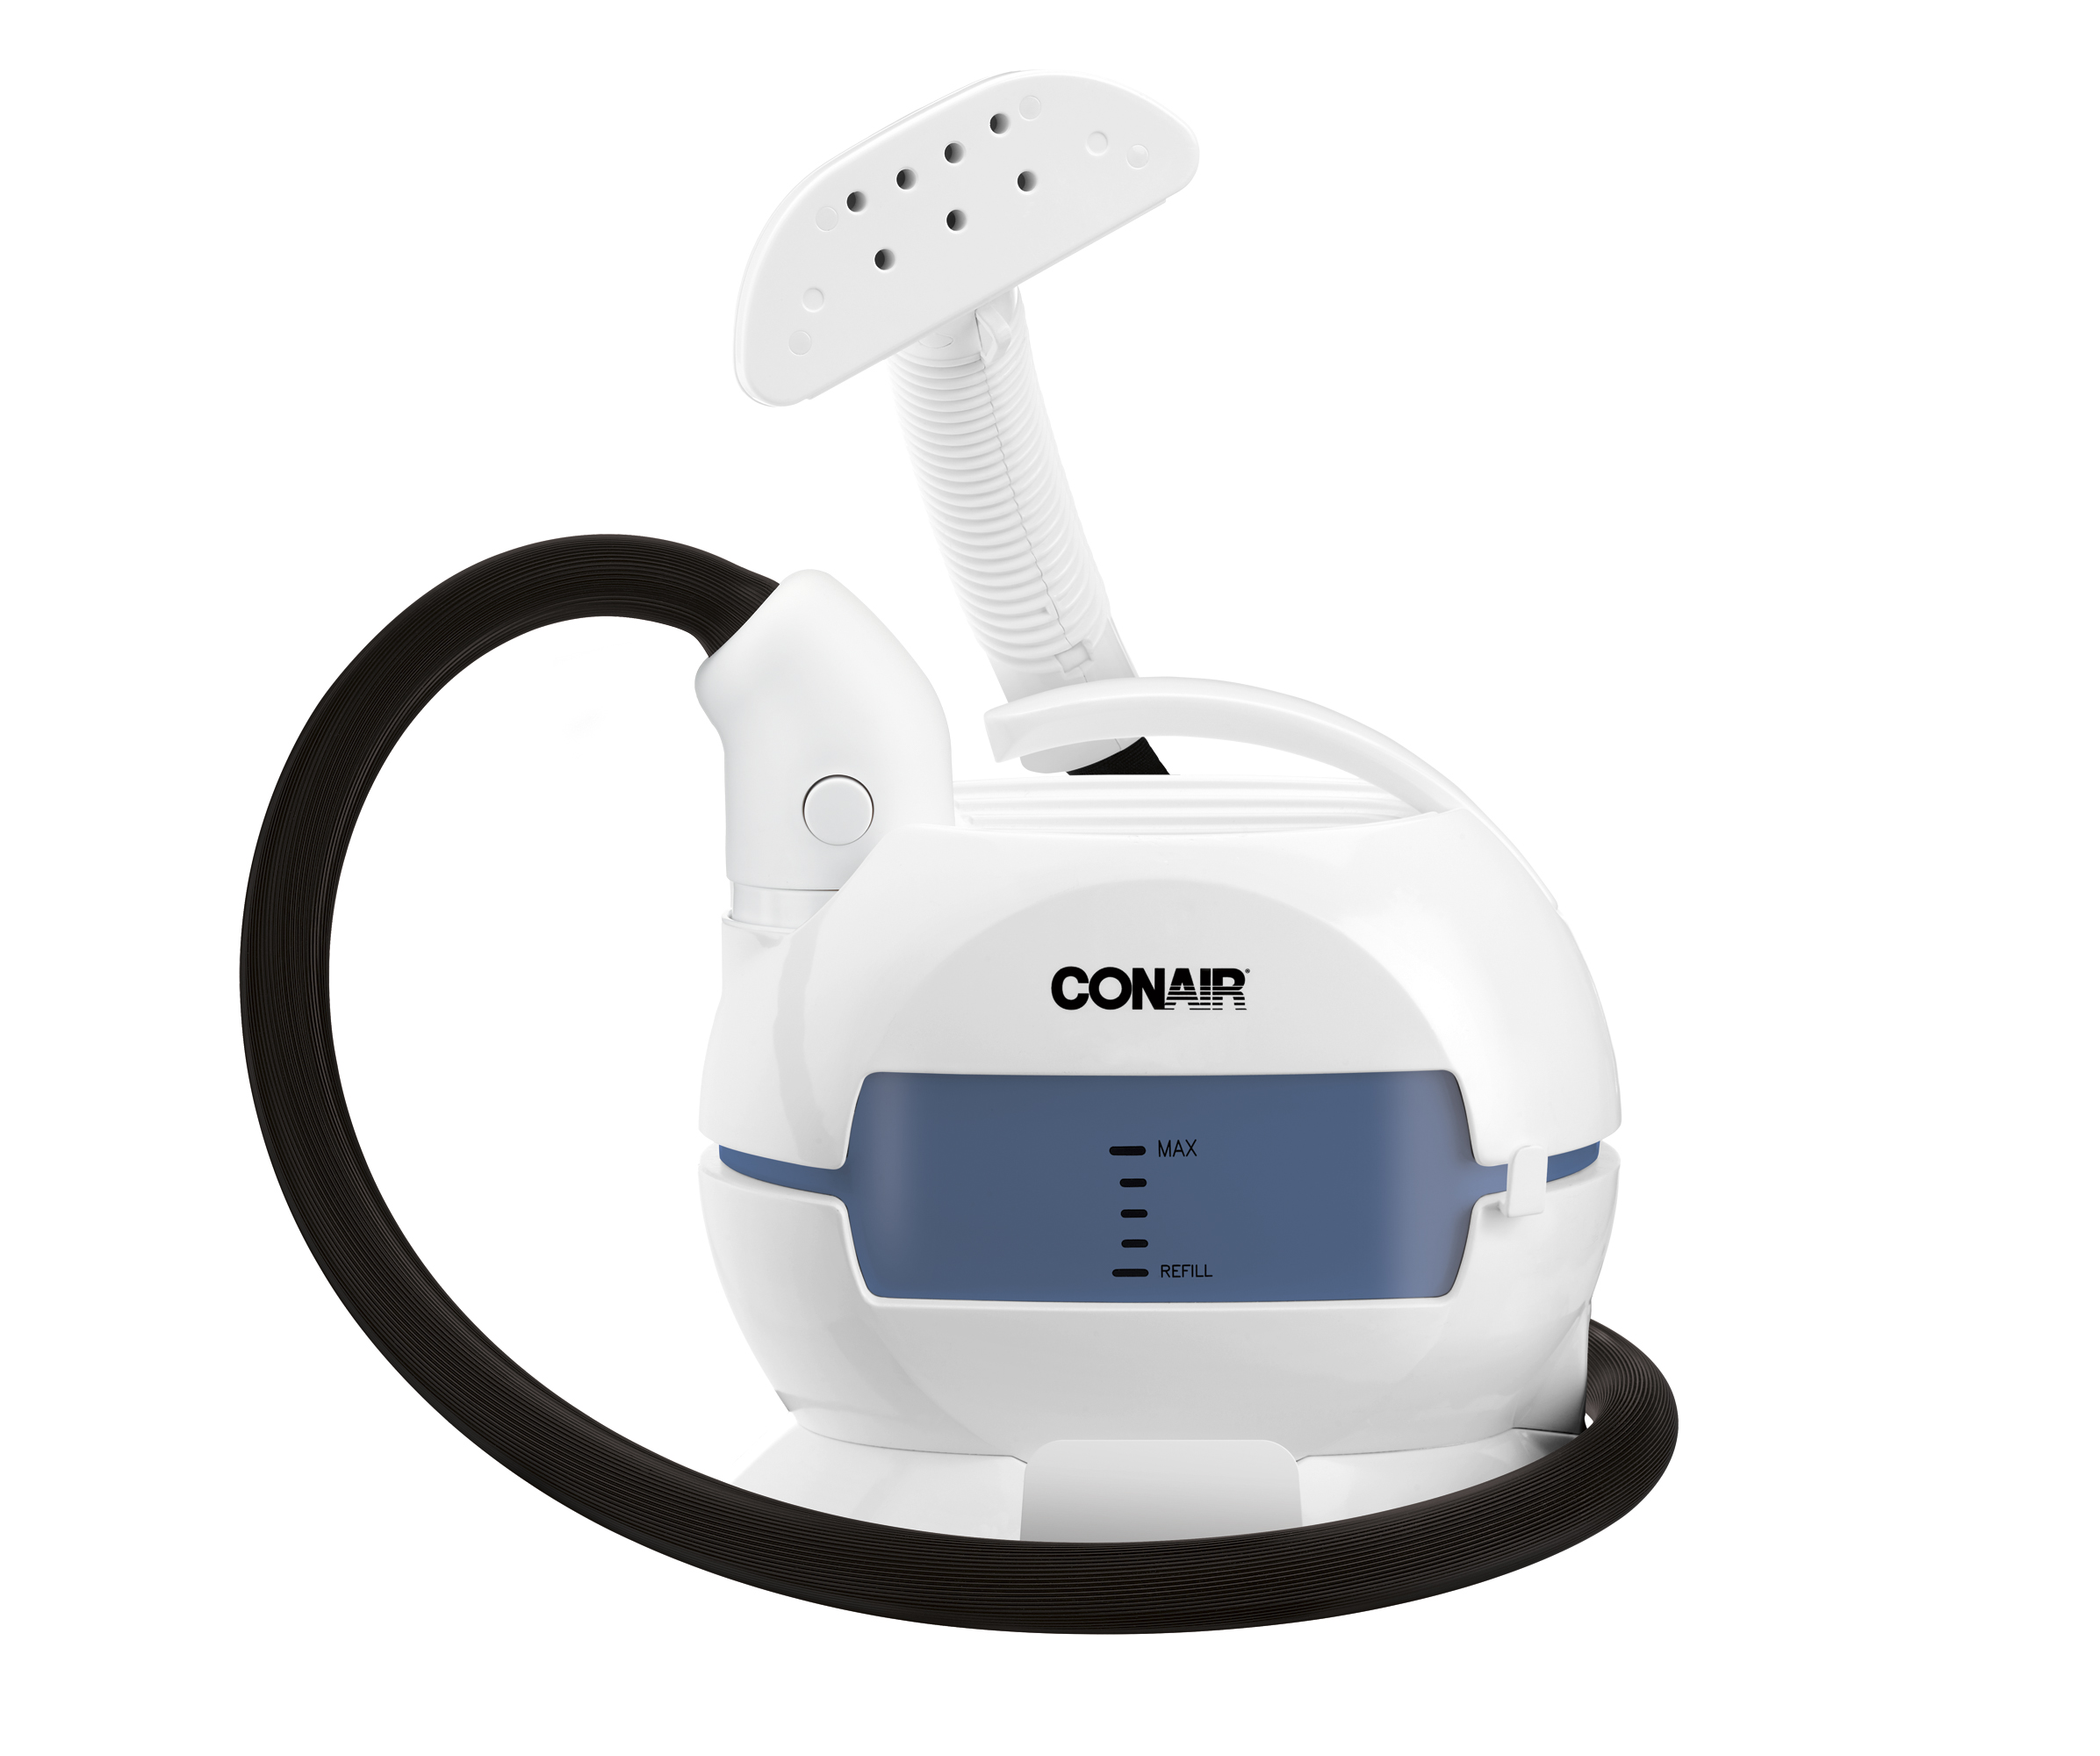 Conair 1200 Watt Commercial Quality Compact Fabric Steamer, Model GS61R....Kills 99.9% of Germs and Bacteria - image 1 of 10